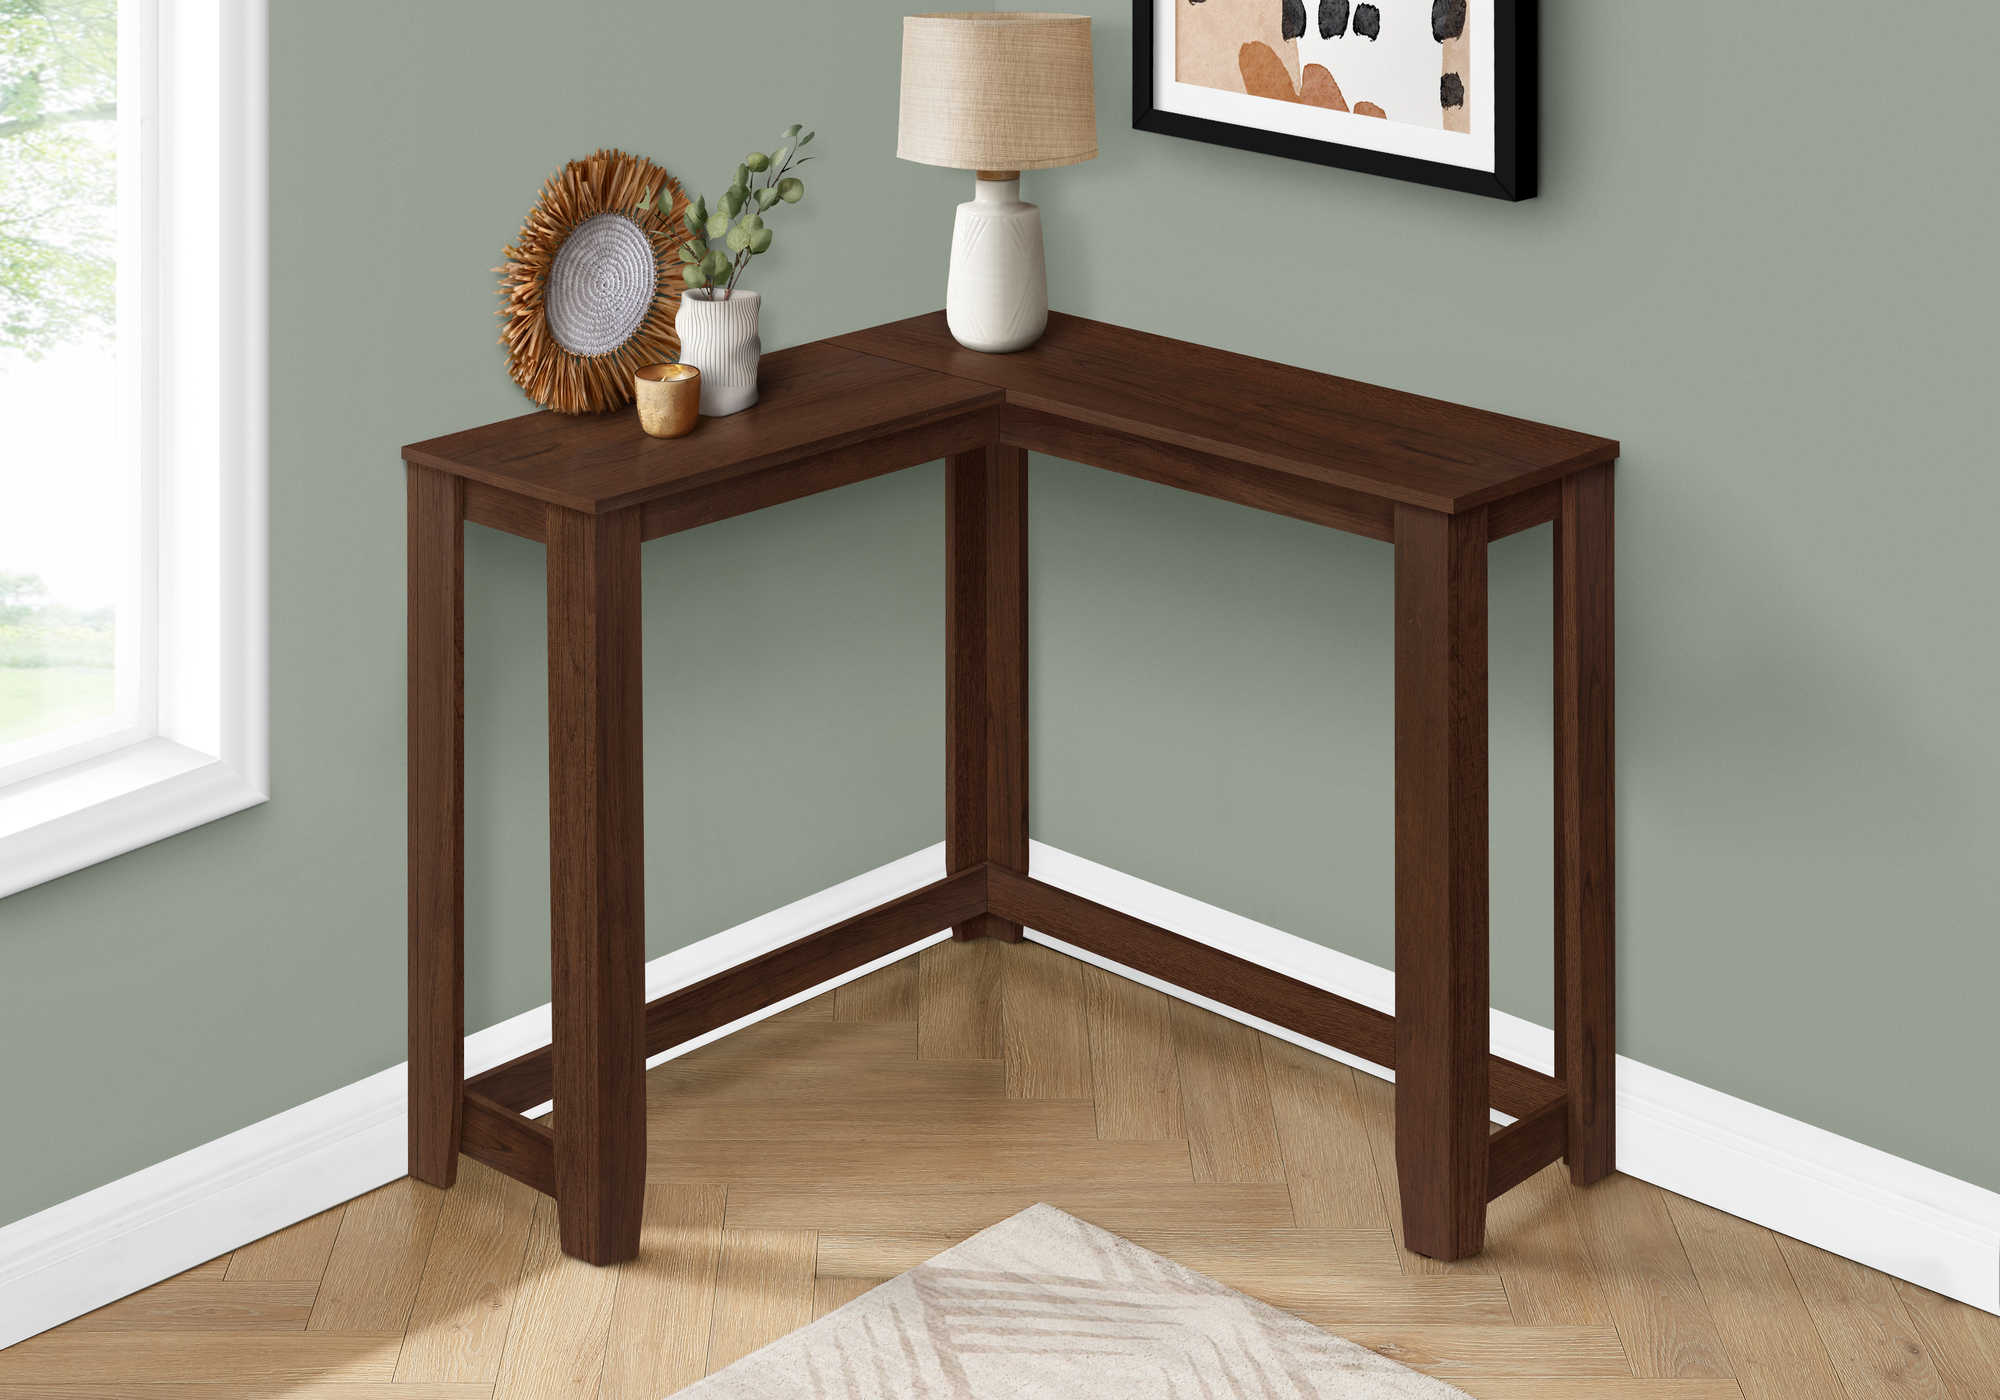 BEDROOM ACCENT CONSOLE TABLE - 36" / CHERRY CORNER CONSOLE